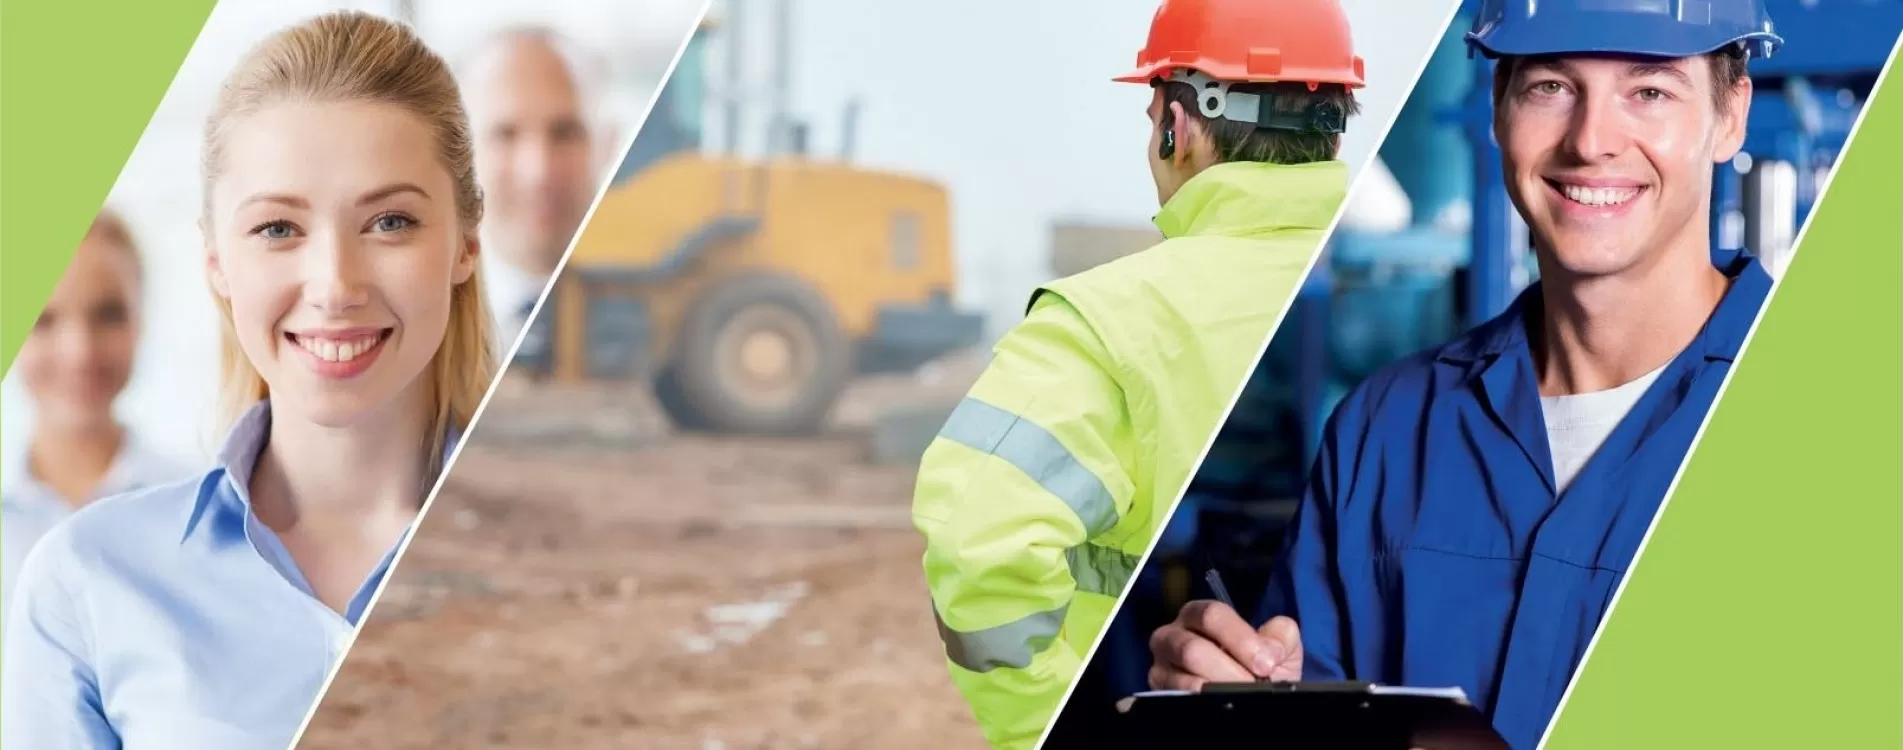 Health & Safety Consultancy Services in Dudley